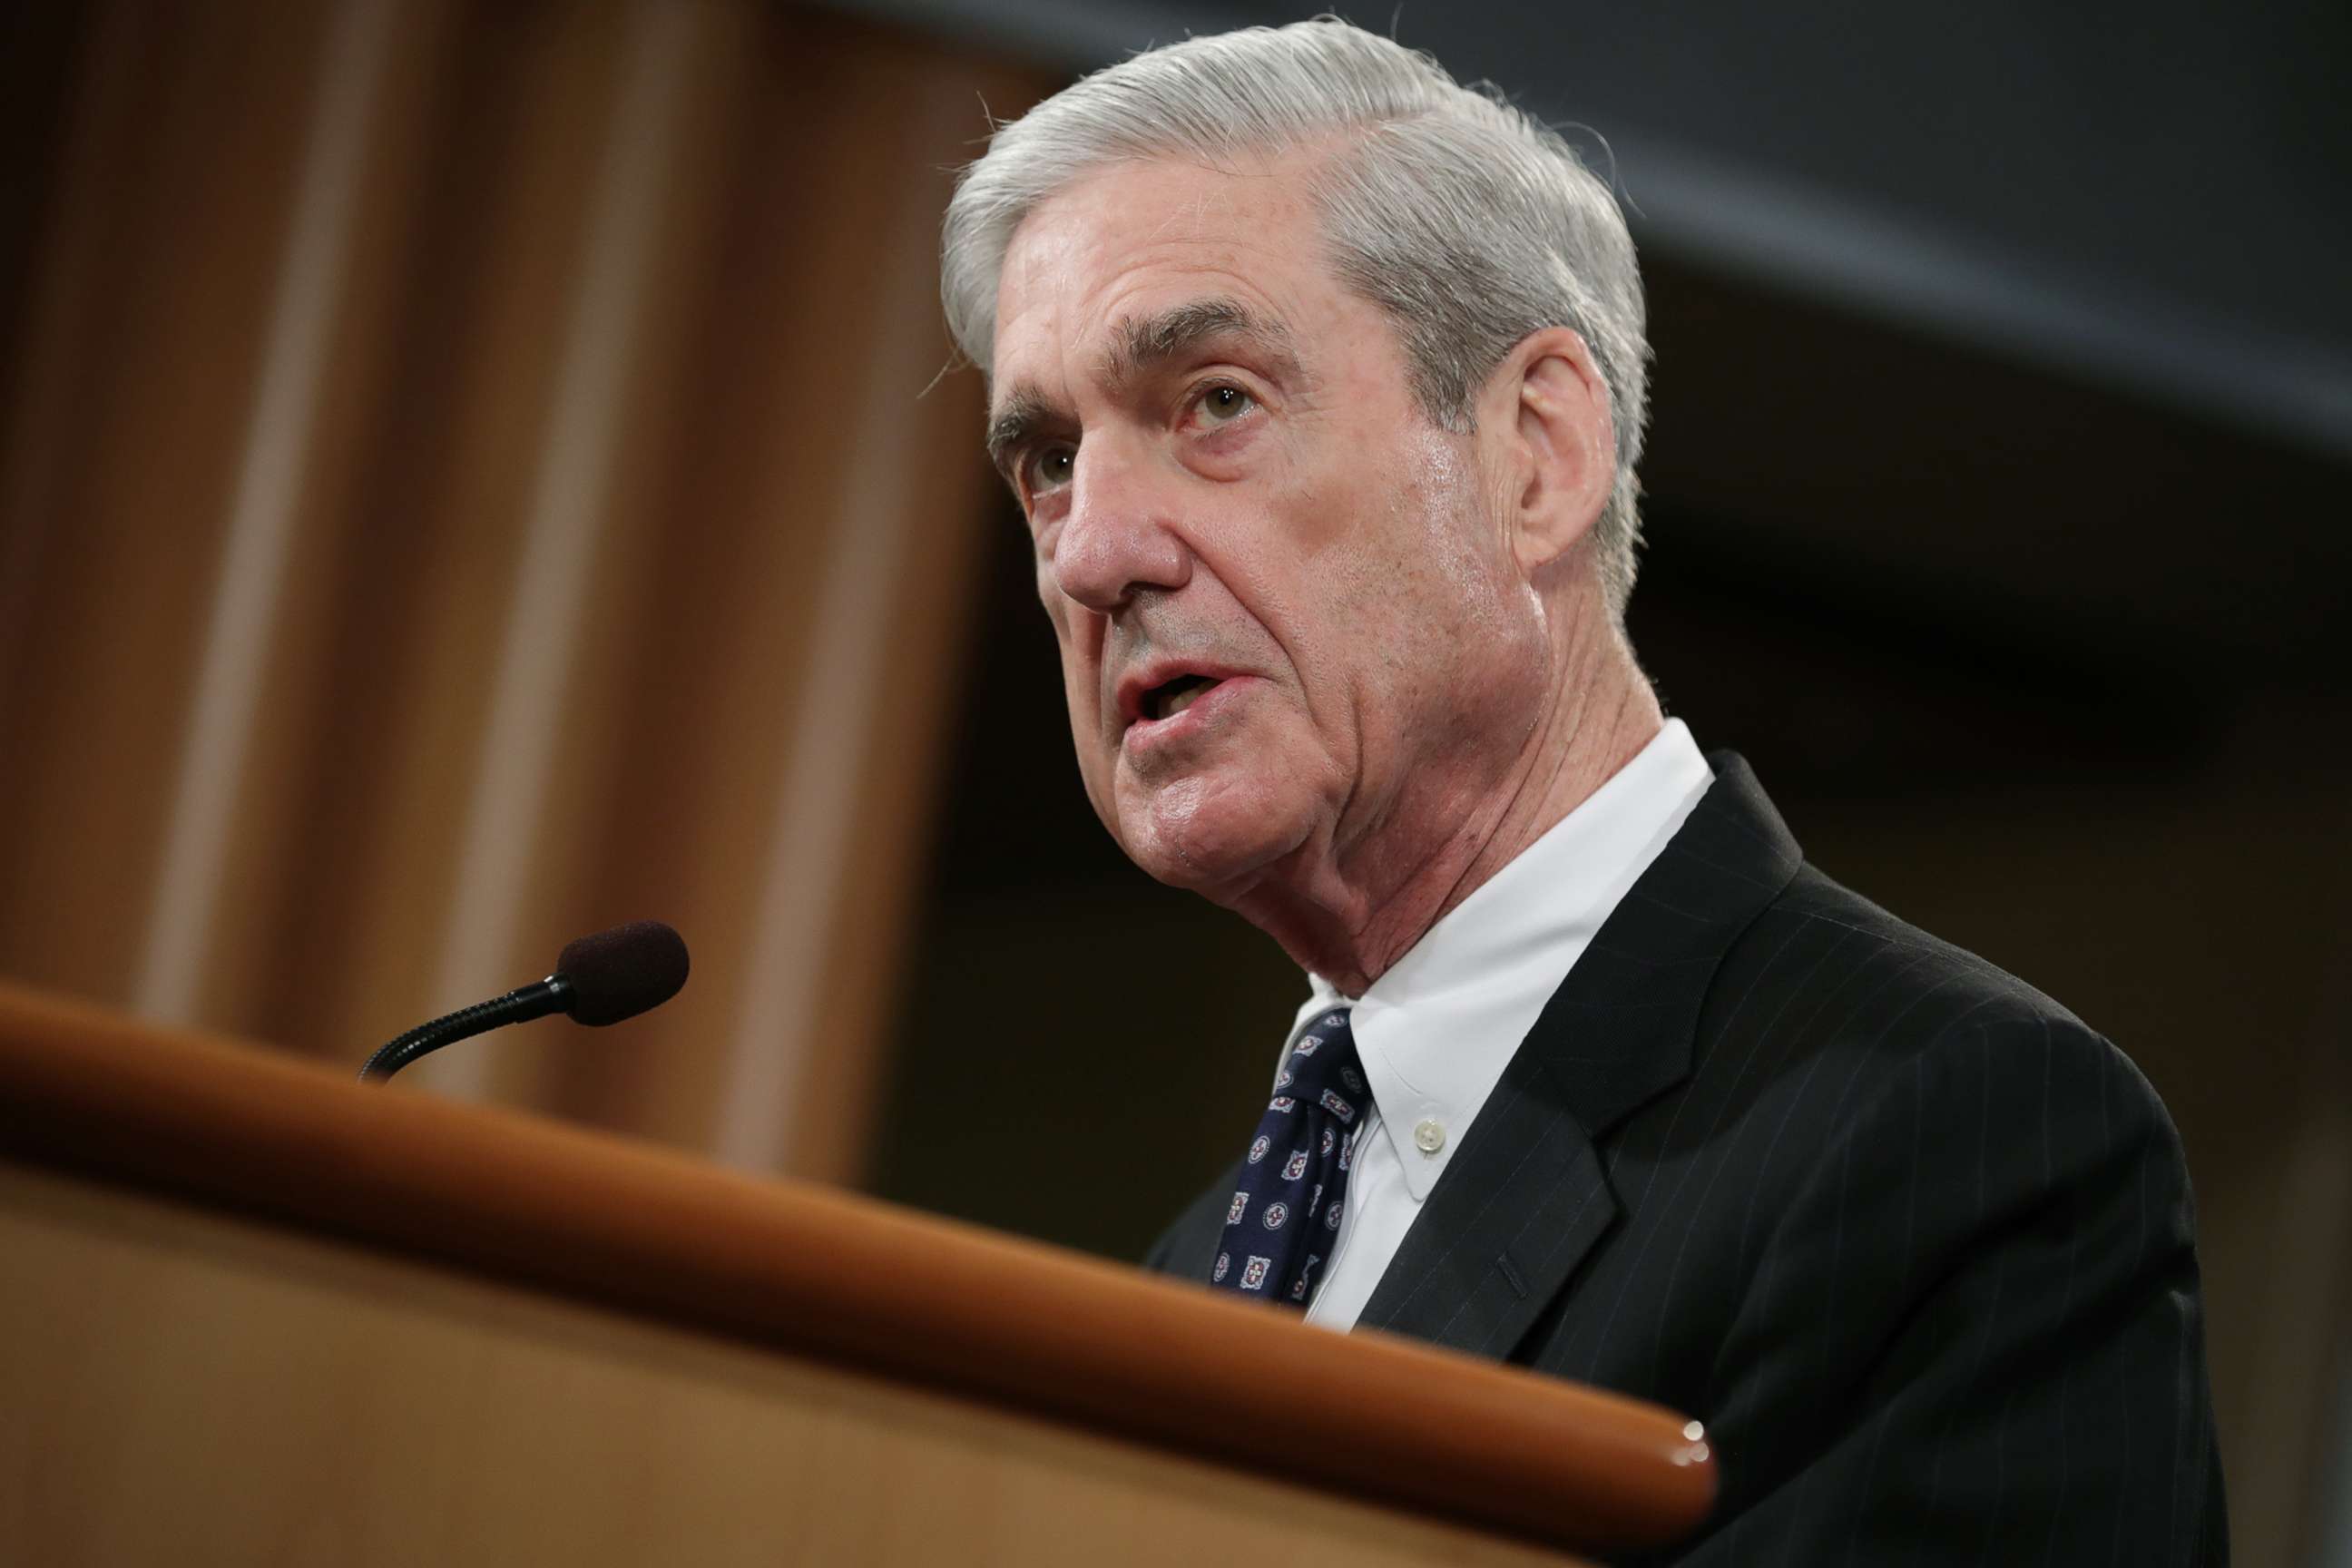 PHOTO: Special Counsel Robert Mueller makes a statement about the Russia investigation on May 29, 2019, at the Justice Department in Washington, D.C.